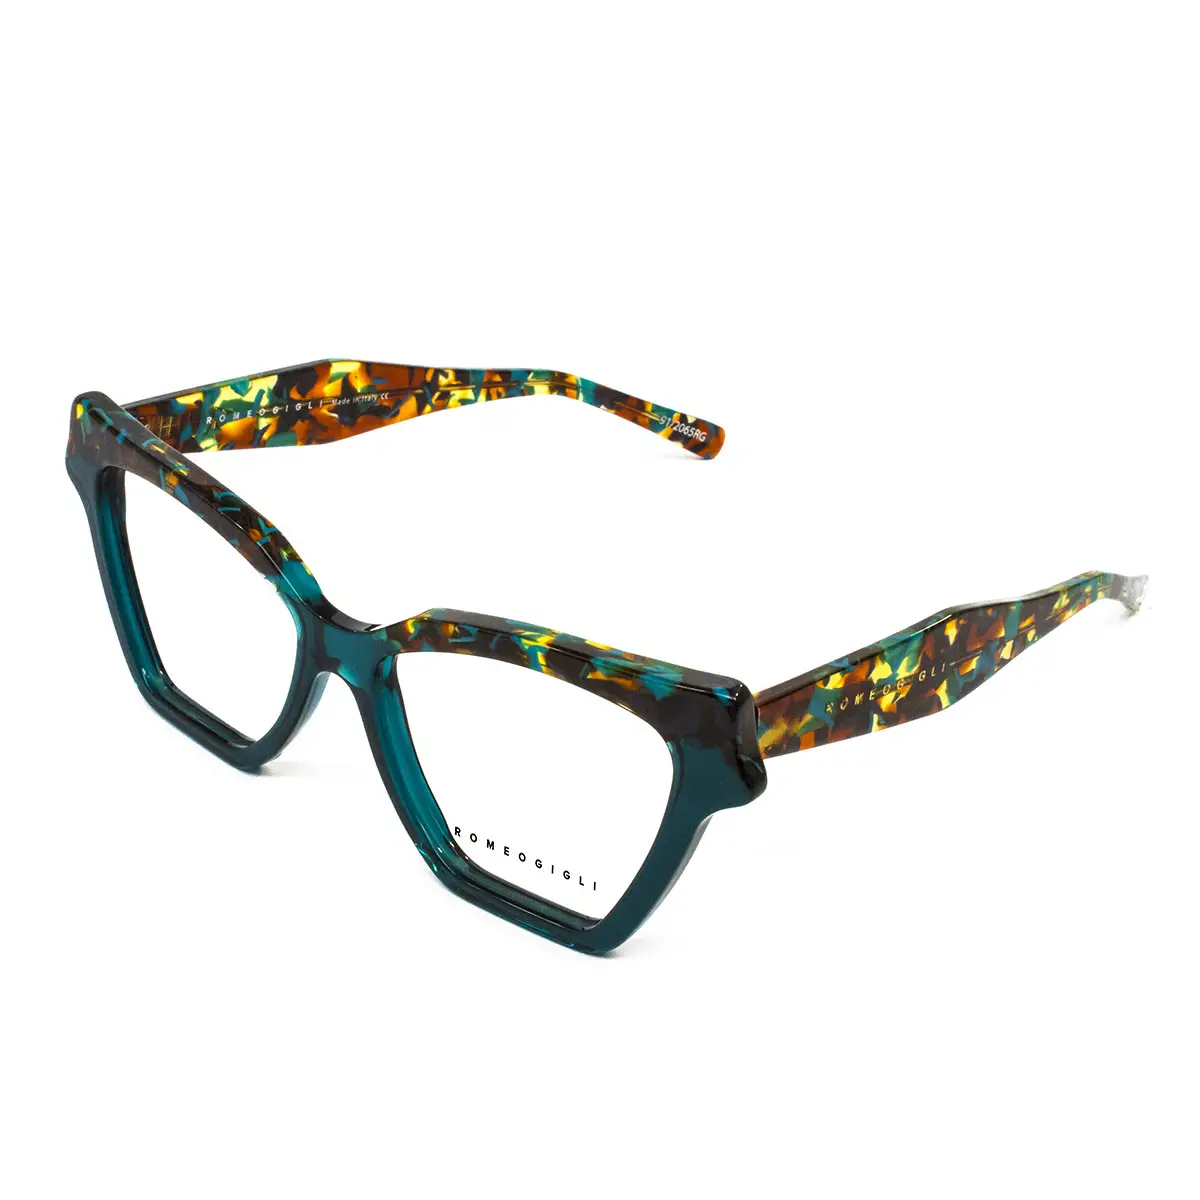 HIGH QUALITY CAT-EYE PETROL BLUE AND FANTASY OPTICAL FRAME FOR BEAUTIFUL WOMAN RGV.16D-PP GRN 53-21-145